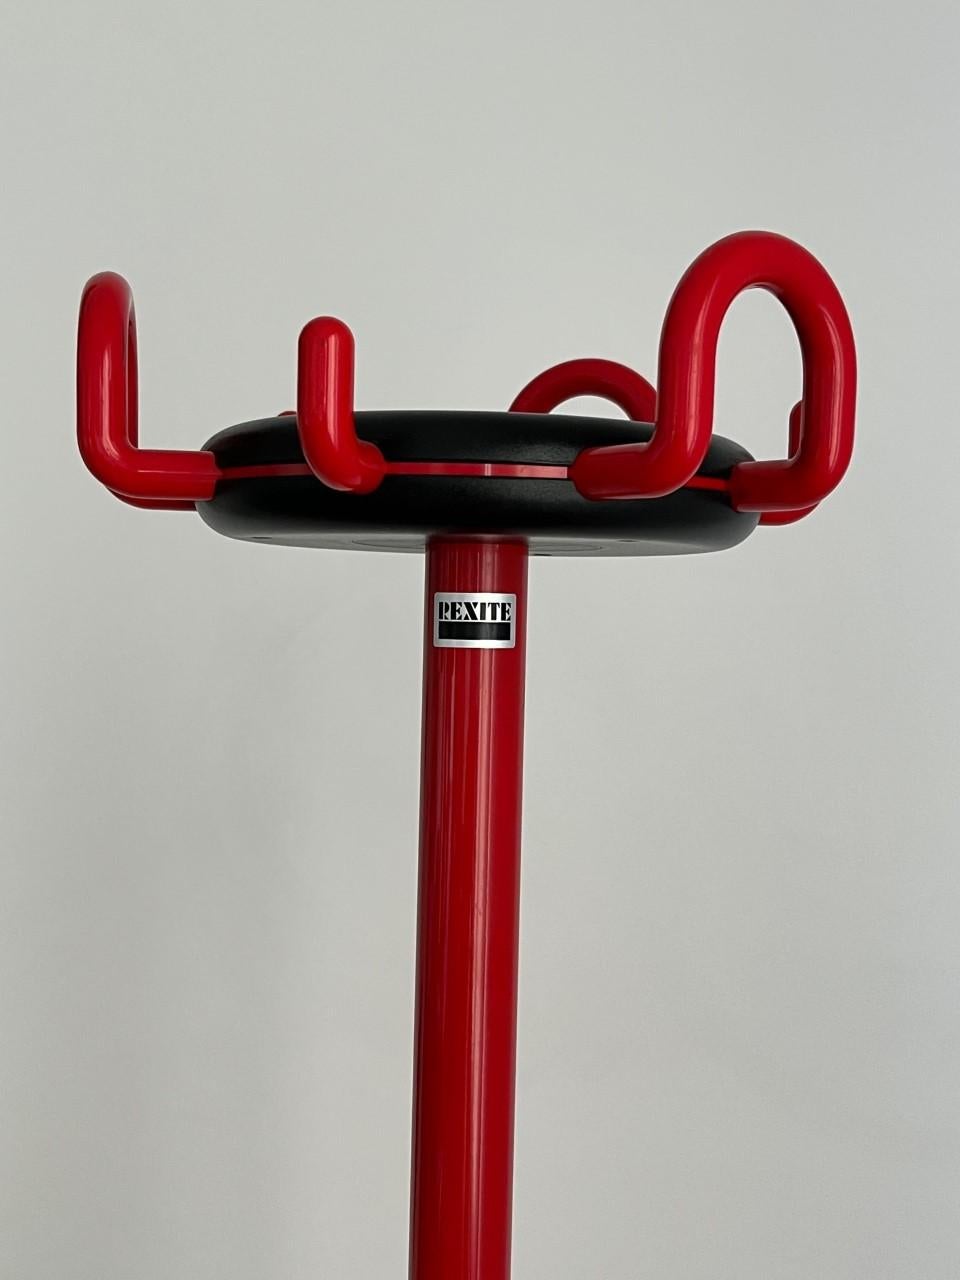 Classic but fashionable design coat stand model 999 Aiuto black for Rexite by Raul Barberi and Georgio Marianelli.
Head and hooks in engineering polymer plastic, leg in varnished or chromium-plated steel, steel base with engineering polymer